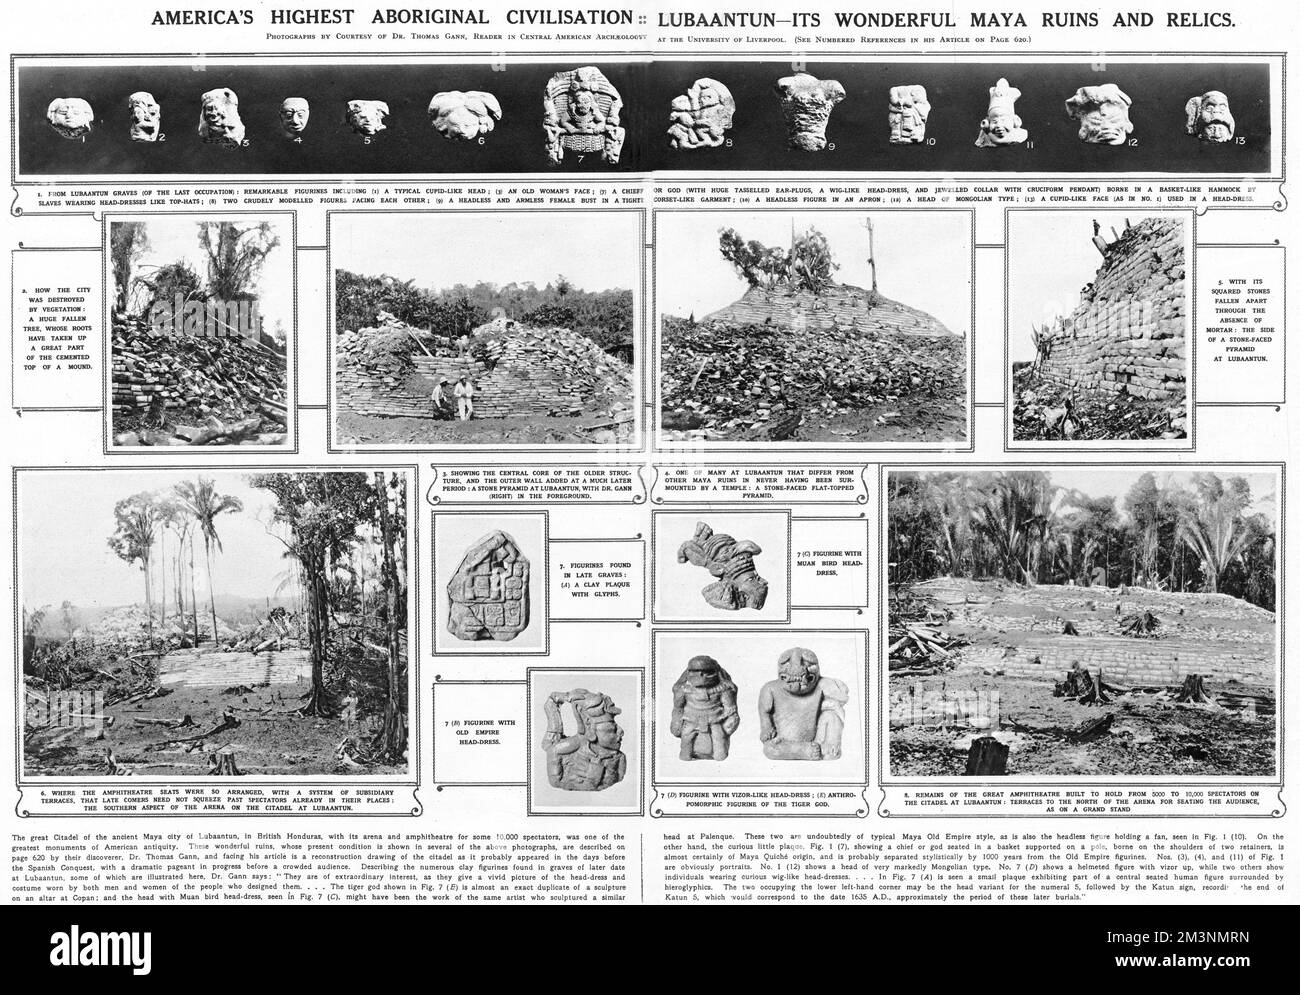 A double page spread in the Illustrated London News, detailing the finds from the Maya site of Lubaantun in British Honduras(today Belize).Figurines from graves as well as details of the remaining structures including the ampitheatre and stone faced pyramid are mentioned. The Illustrated London News took especial interest in this latest expedition, employing some of the archaeologists such as Gunn and Mitchell Heges to report back on their findings.     Date: 1925 Stock Photo